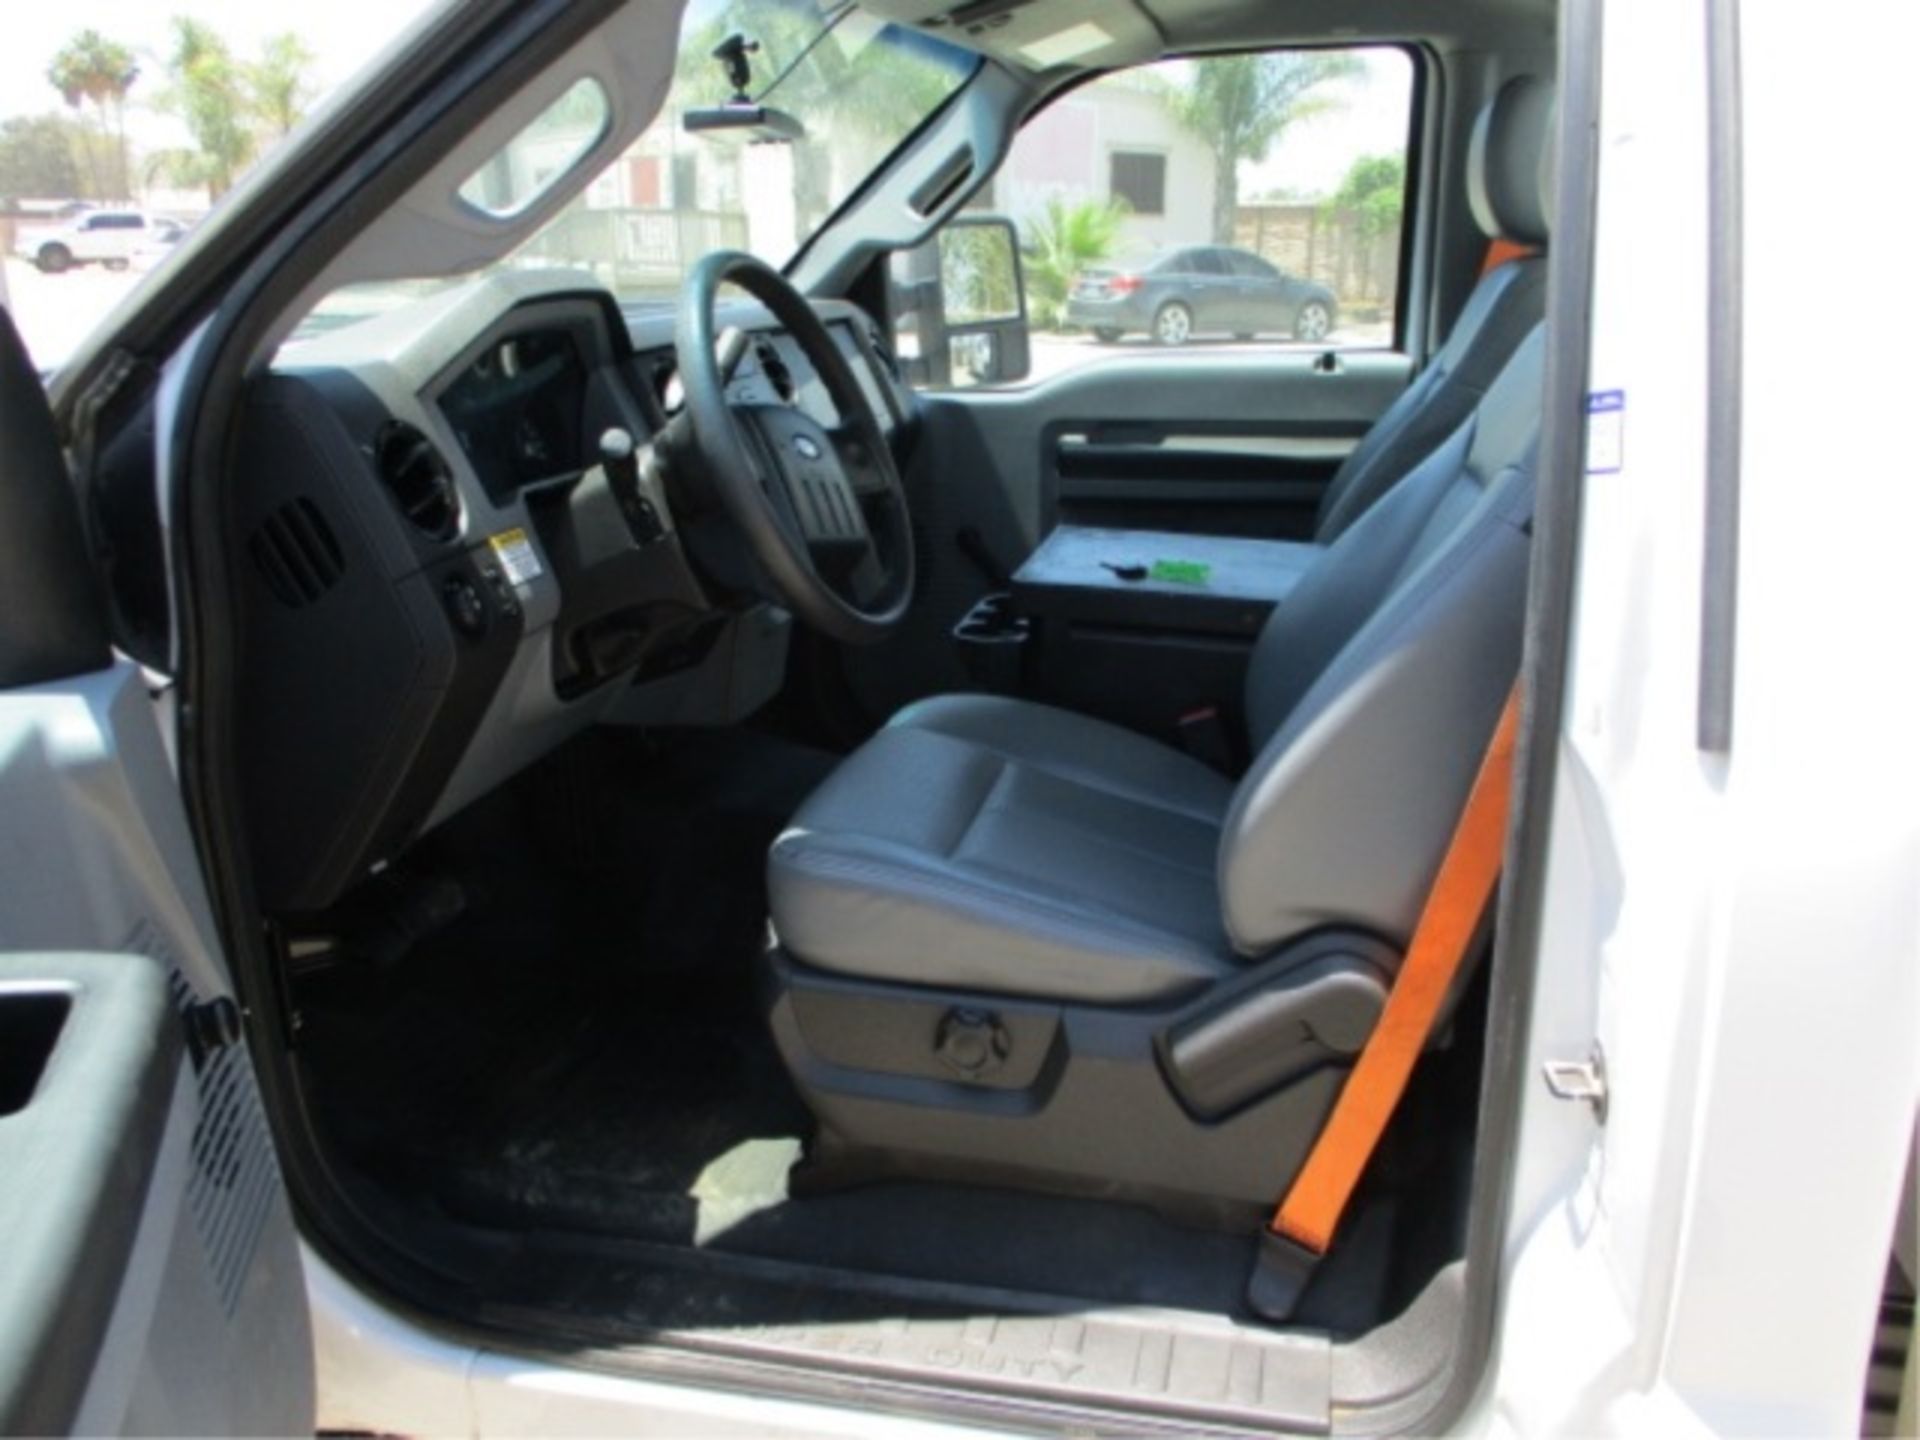 2013 Ford F350 SD Utility Truck, 6.2L V8 Gas, Automatic, Enclosed Utility Body, Onan Gas - Image 59 of 84